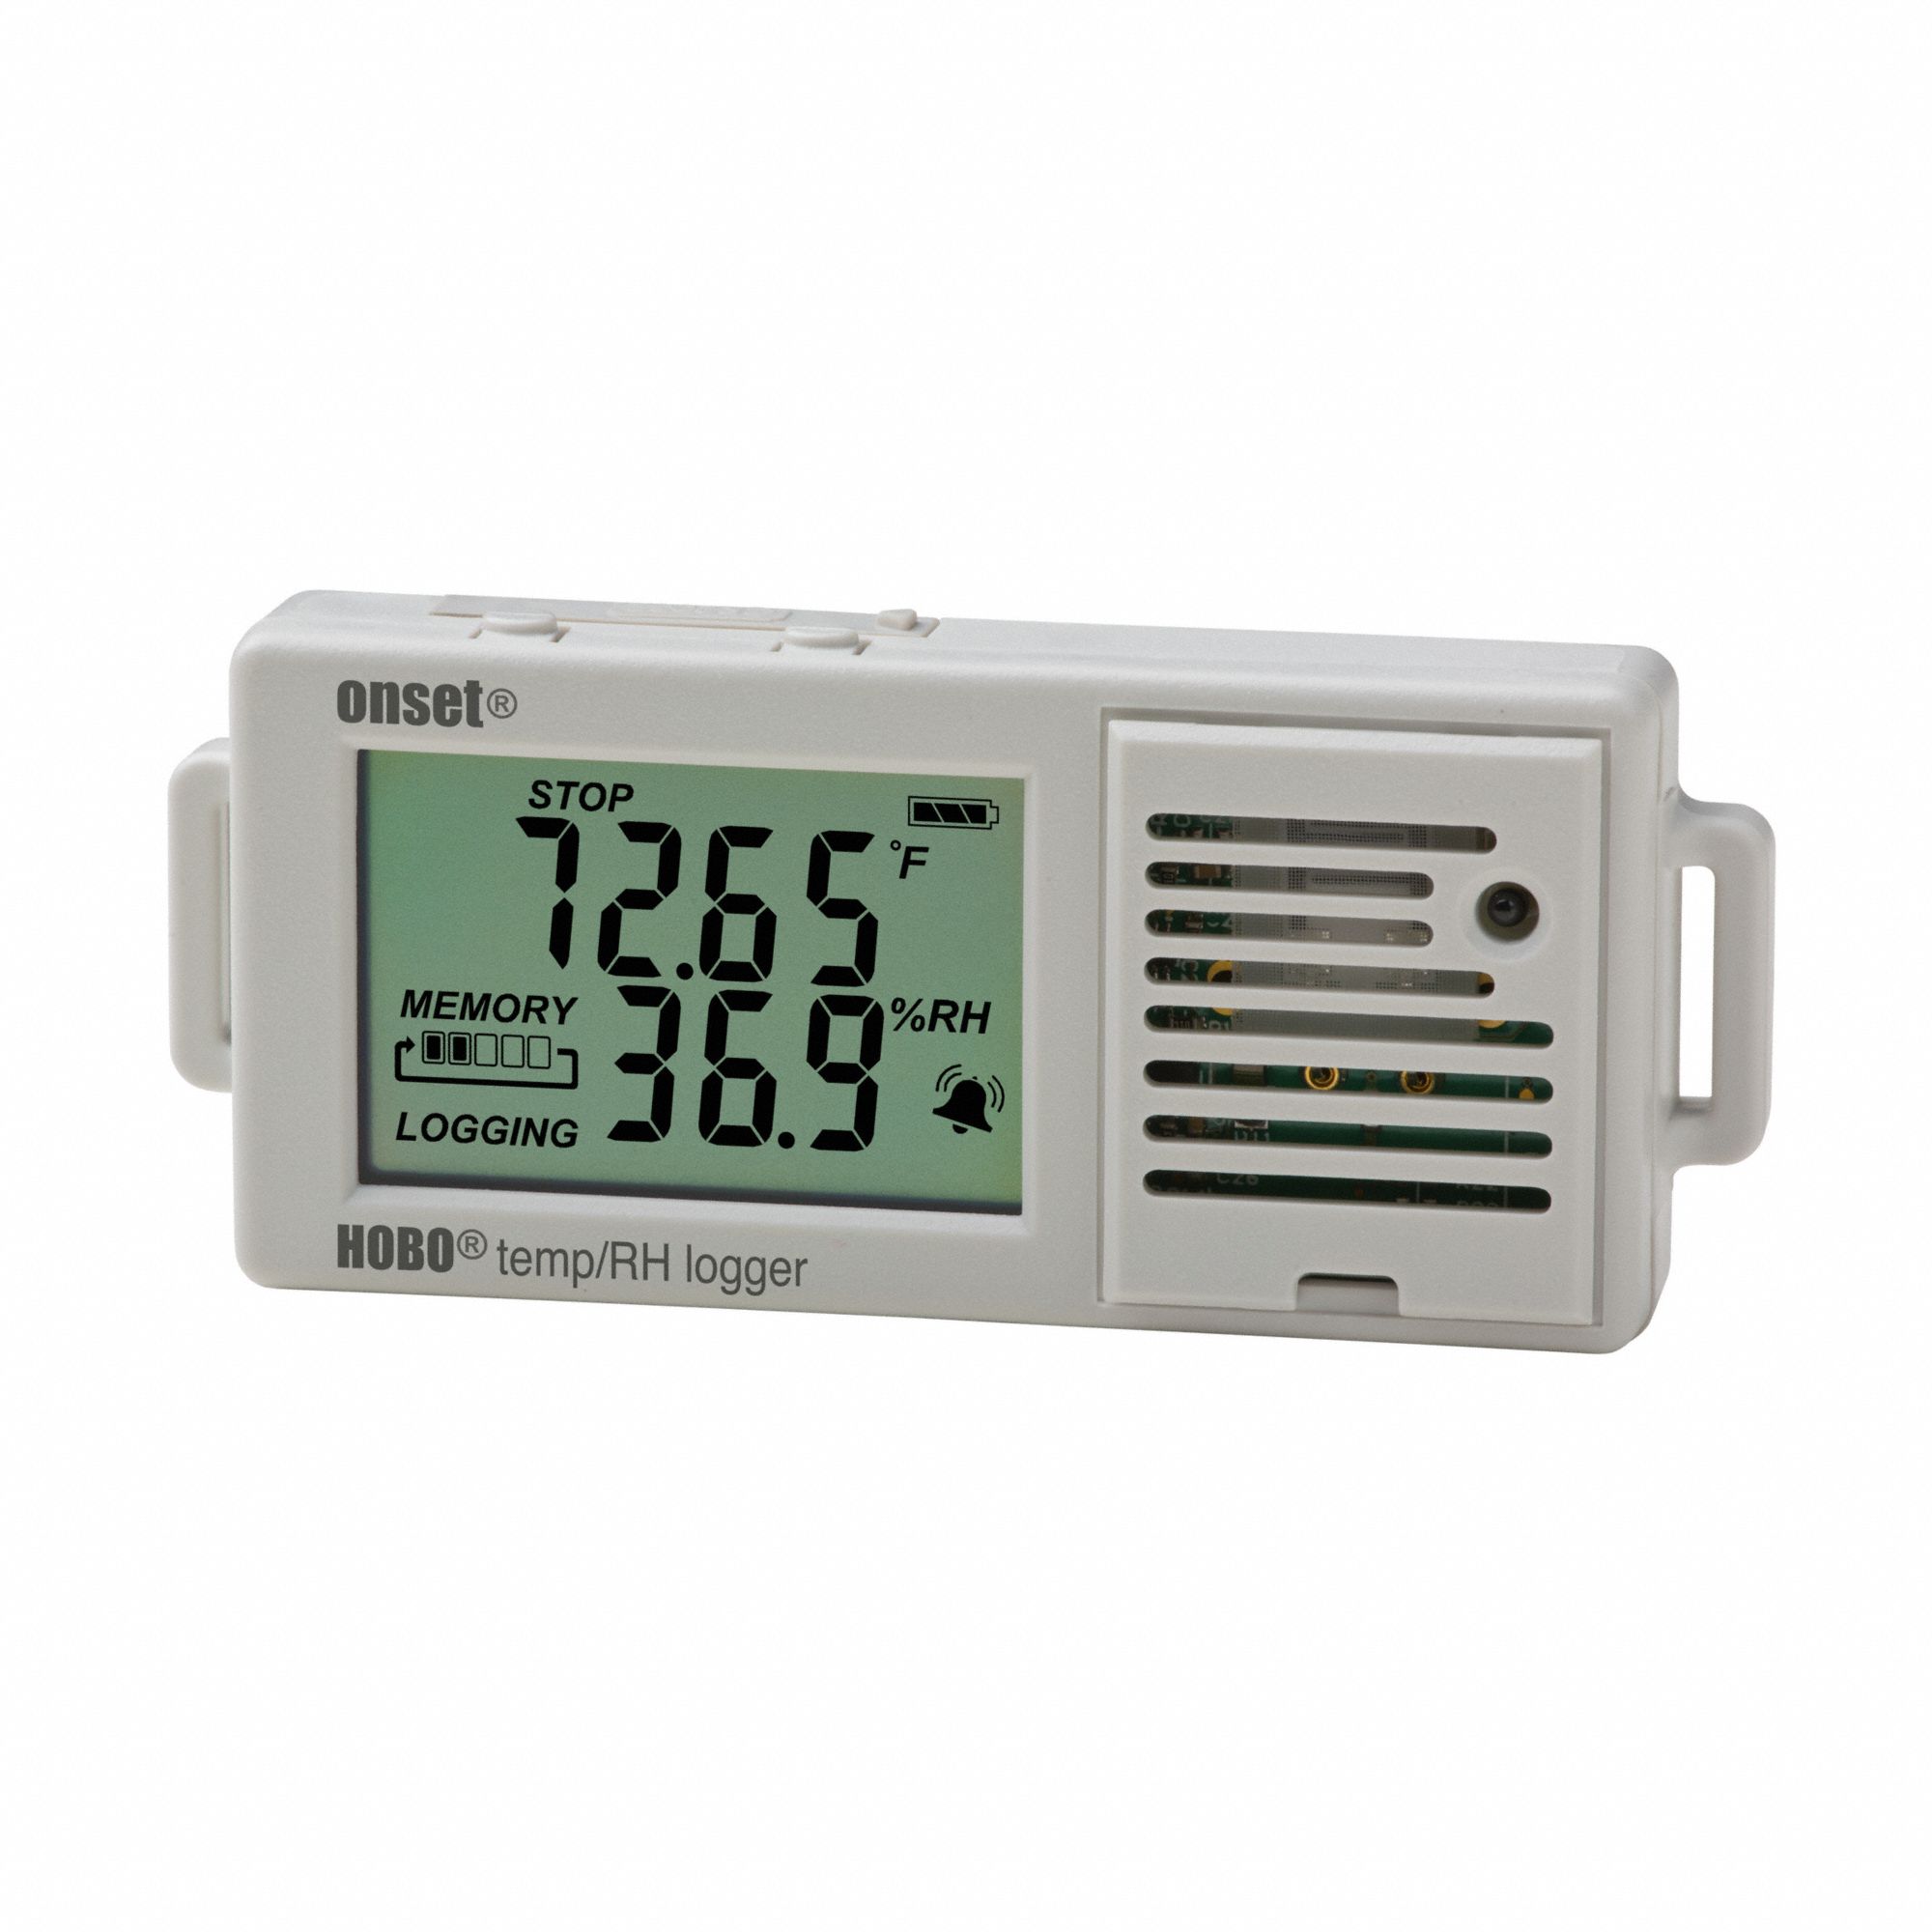 Data Logger: ±3.5% RH from 25% to 85% RH Accuracy, -4° to 158°F, 1 yr Battery Life, USB